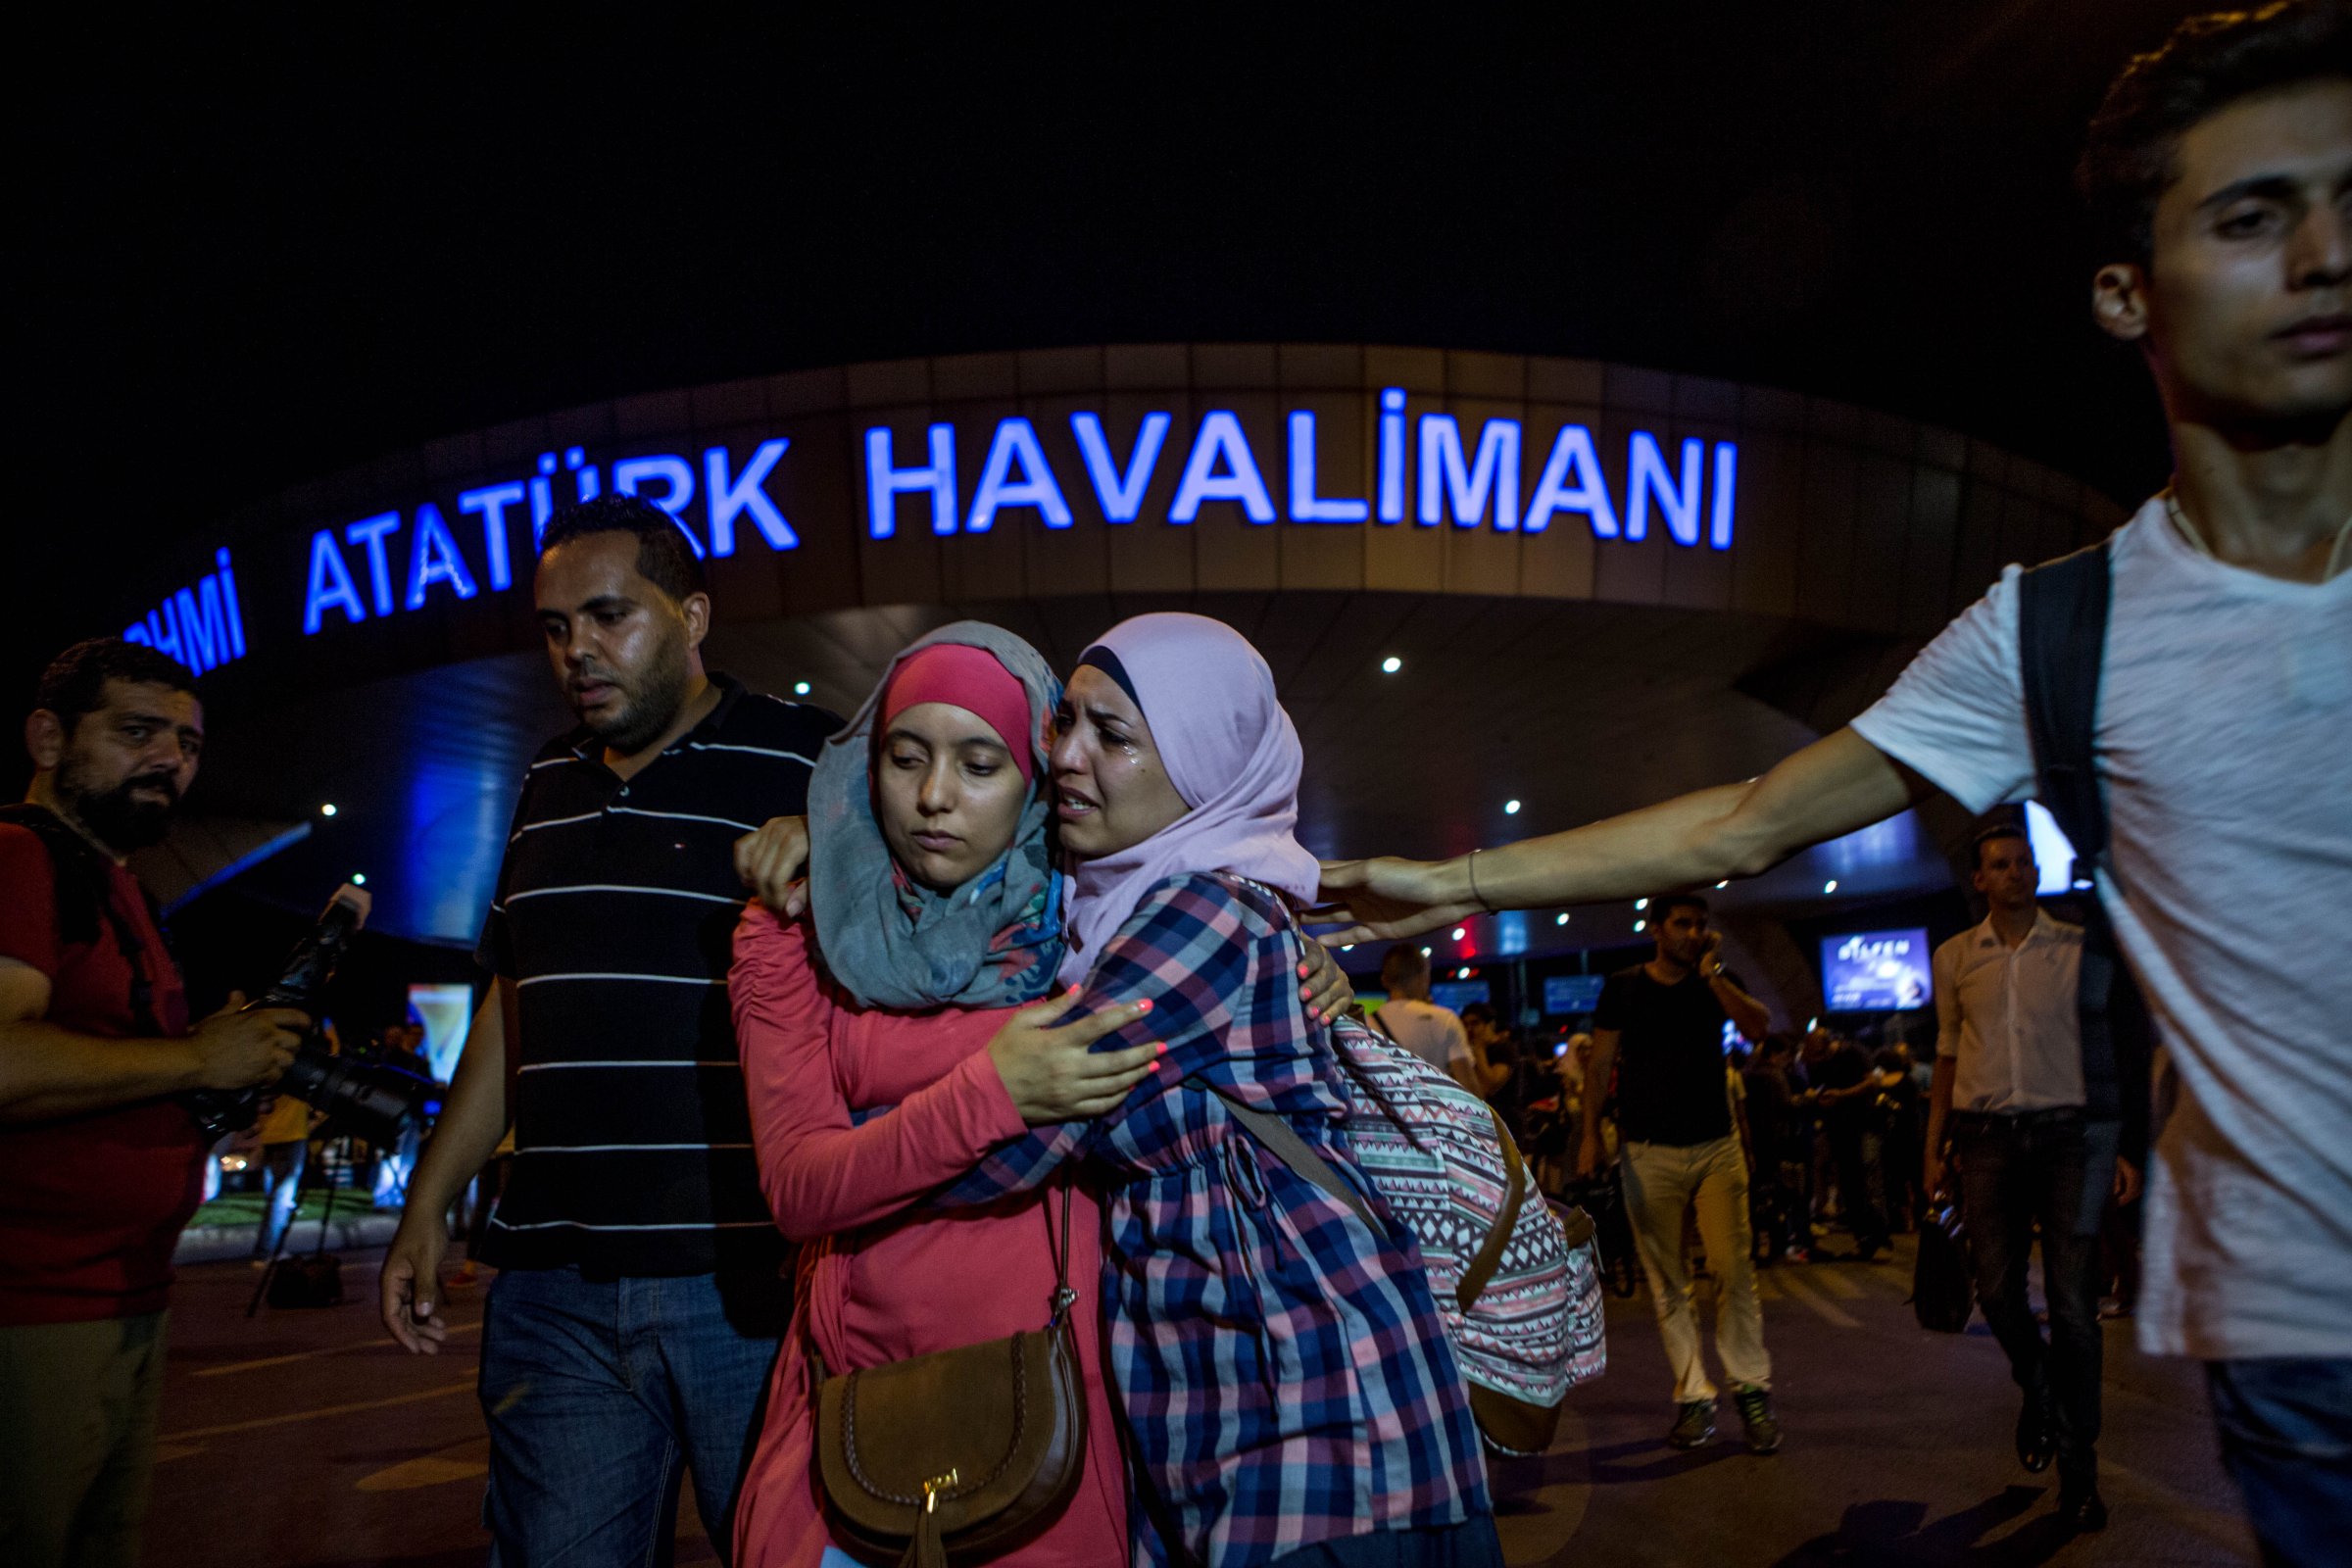 Passengers leave Istanbul Ataturk Airport, Turkey's largest airport, after a suicide-bomb attack in the early hours of in Istanbul on June 29, 2016.